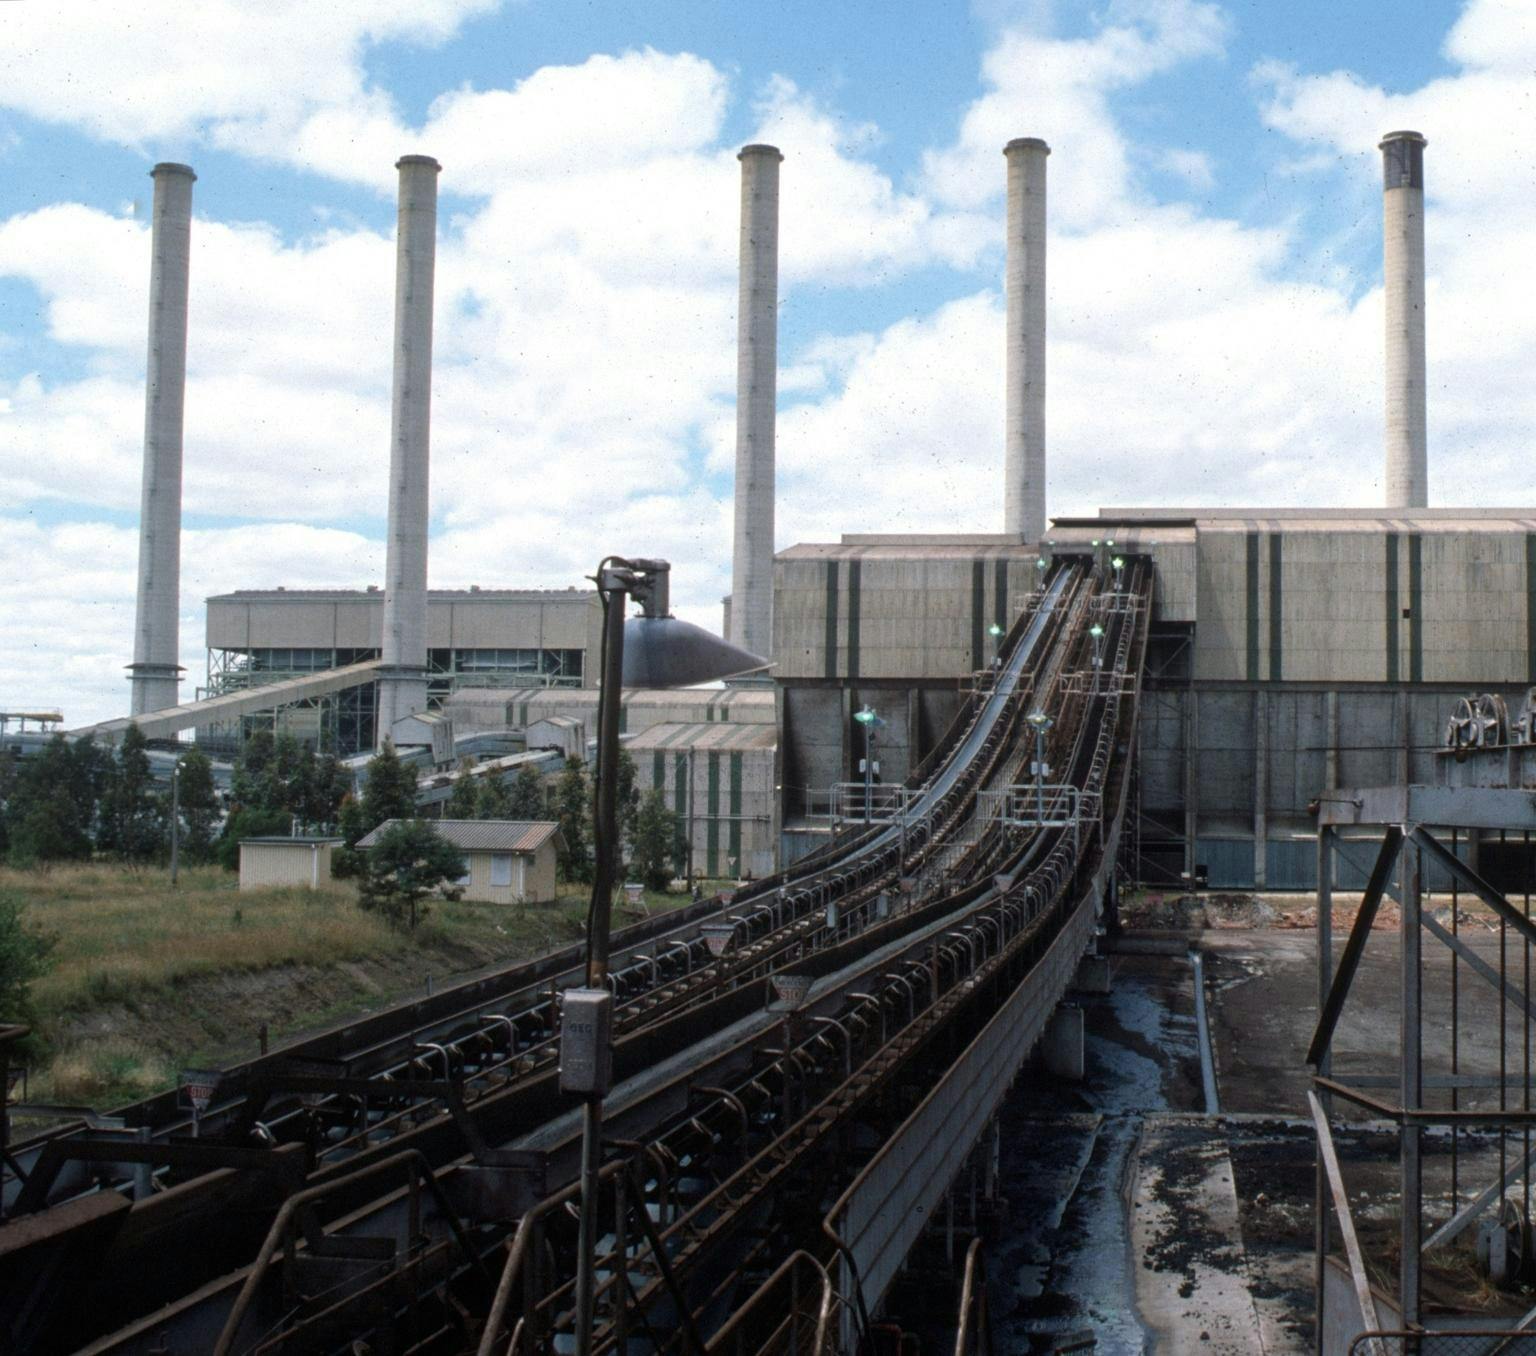 four chimneys rising a grey building with a coal transporting belt leading into the building